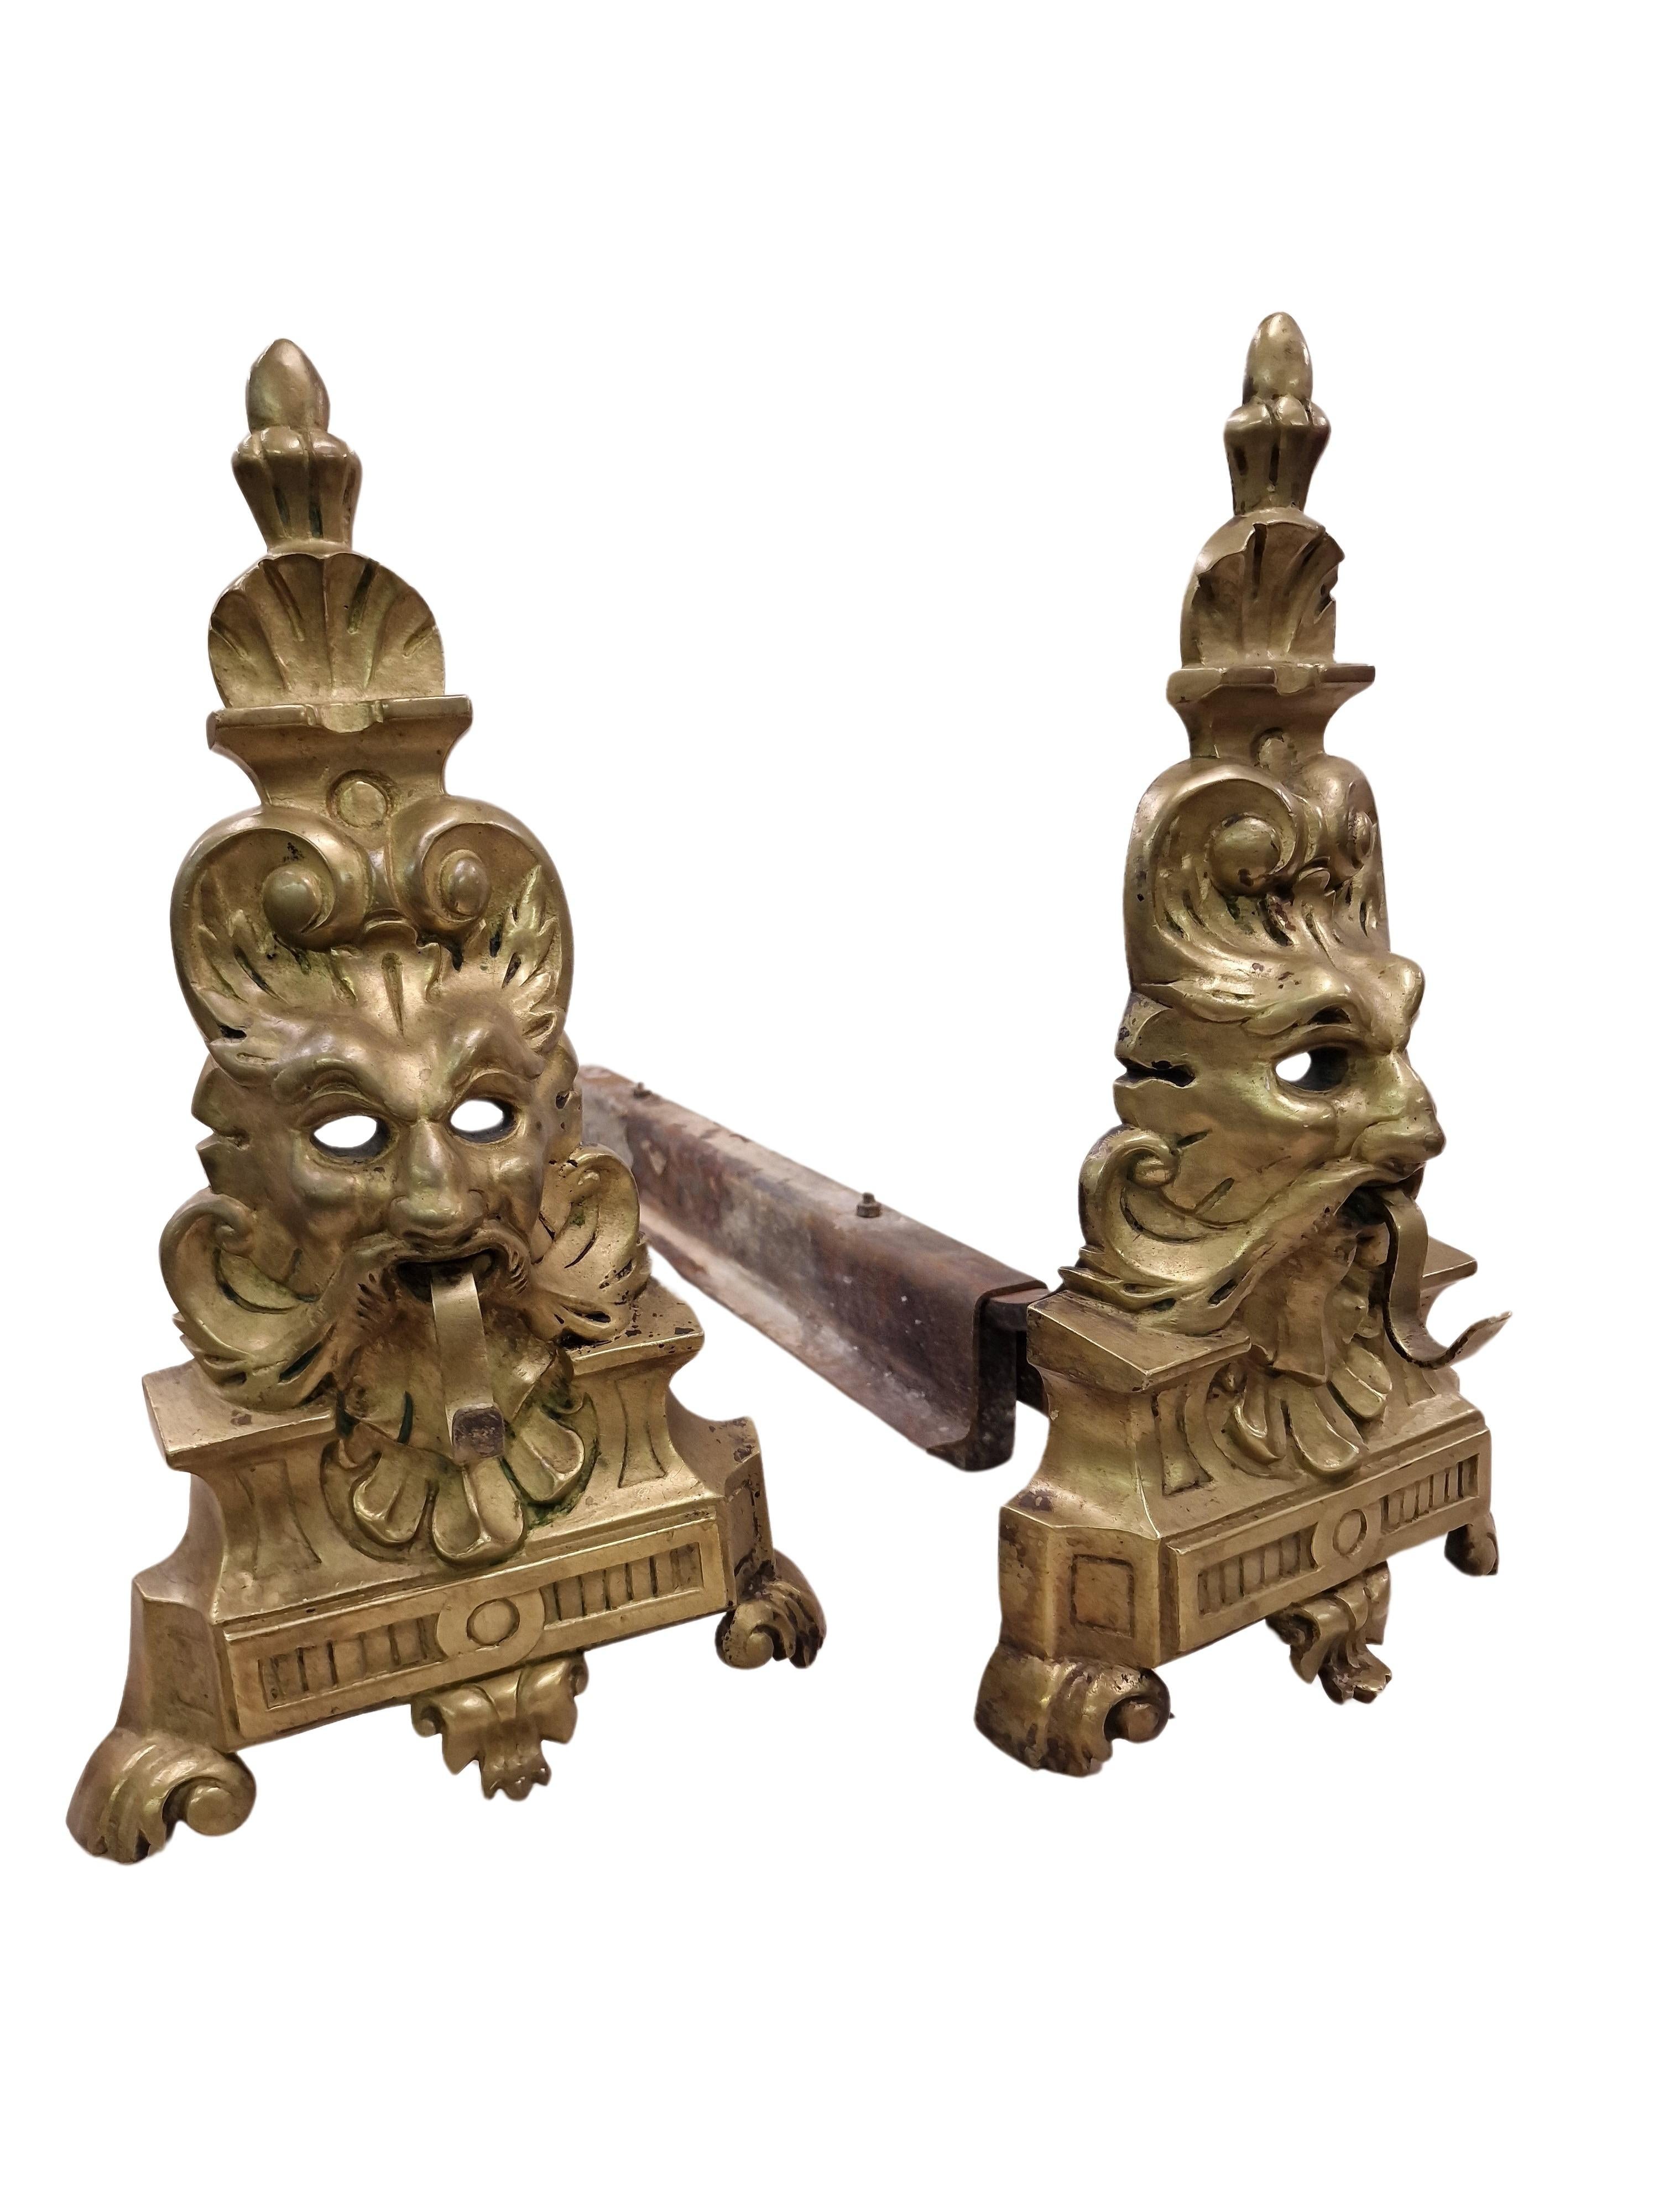 Wonderful pair of fireplace figurines, particularly rare design, made in France in the second half of the 19th century, around 1870.

The aids to enable stylish heating are placed next to or in front of the fireplace in order to place the wood on it